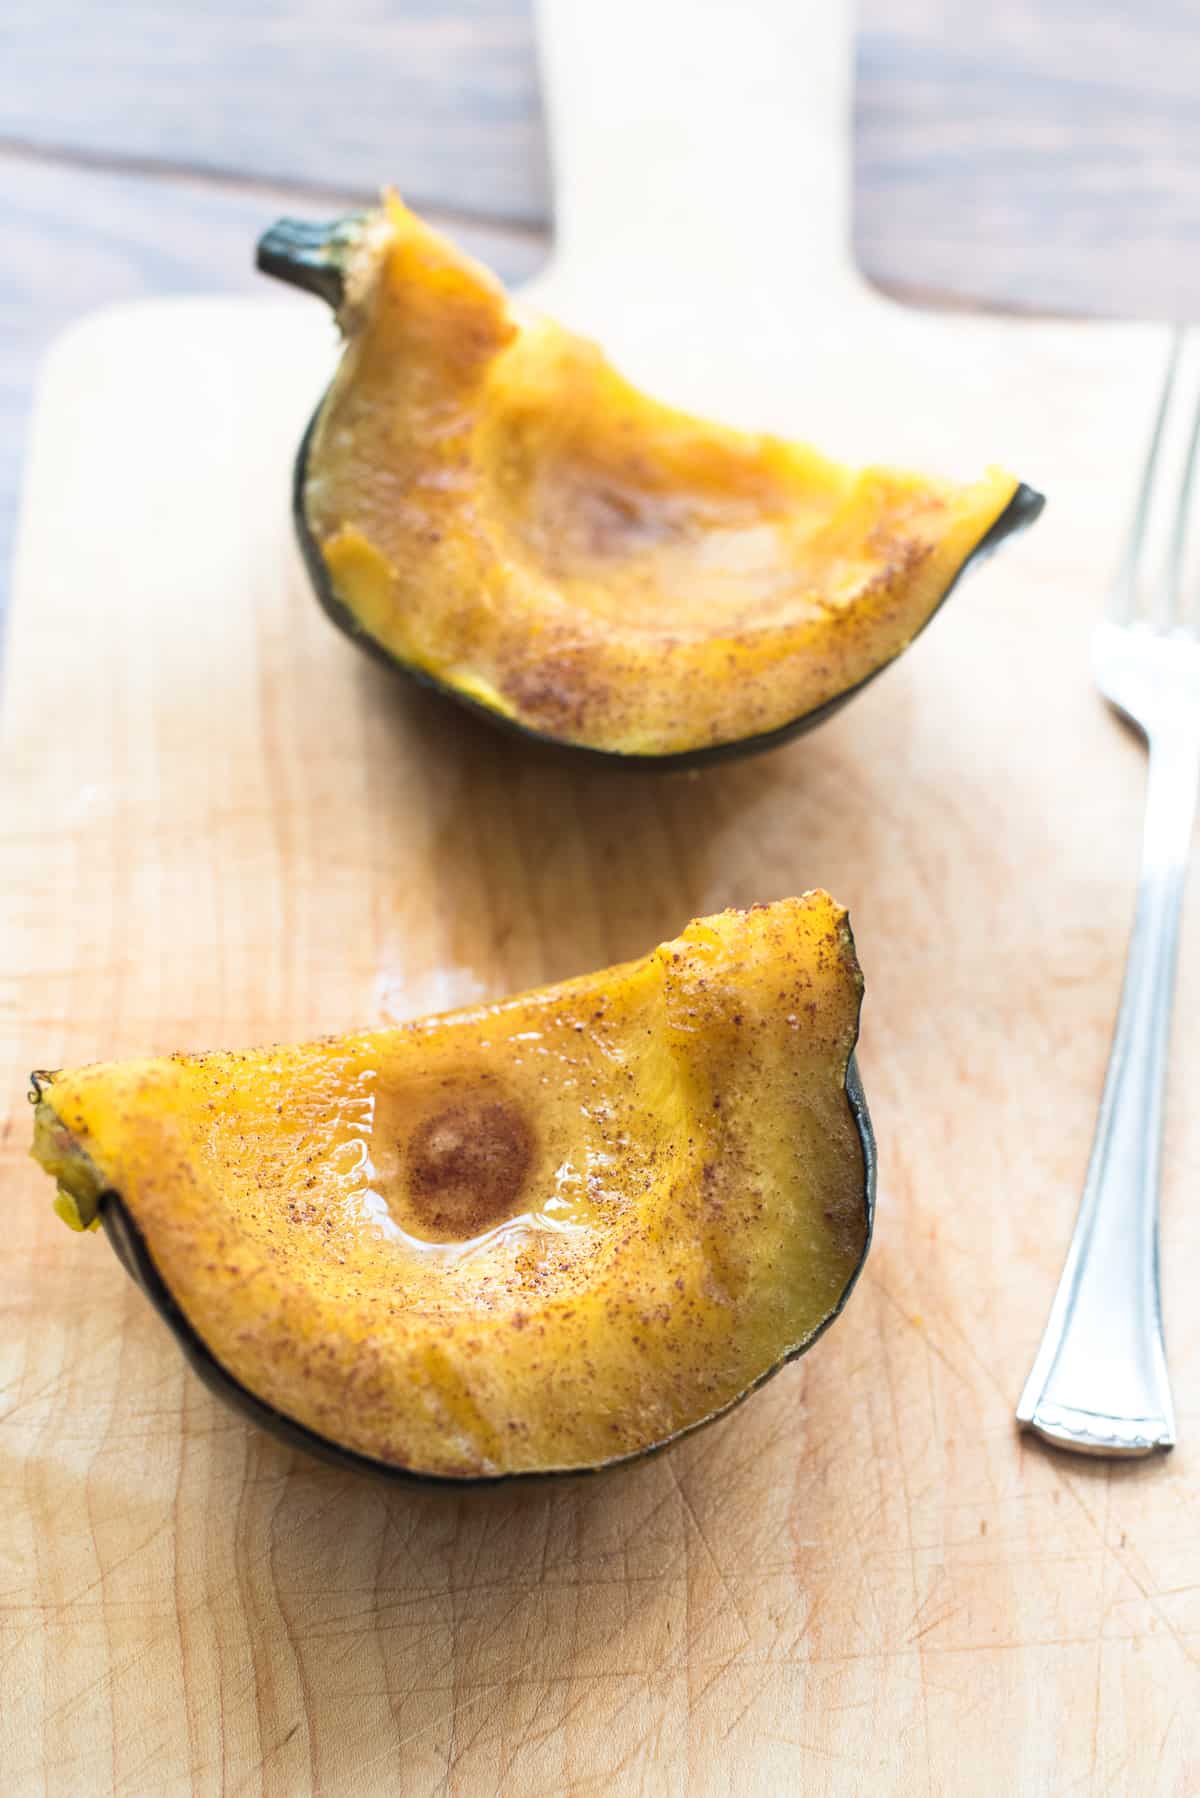 Two pieces of baked acorn squash placed skin side down on a cutting board with a fork.